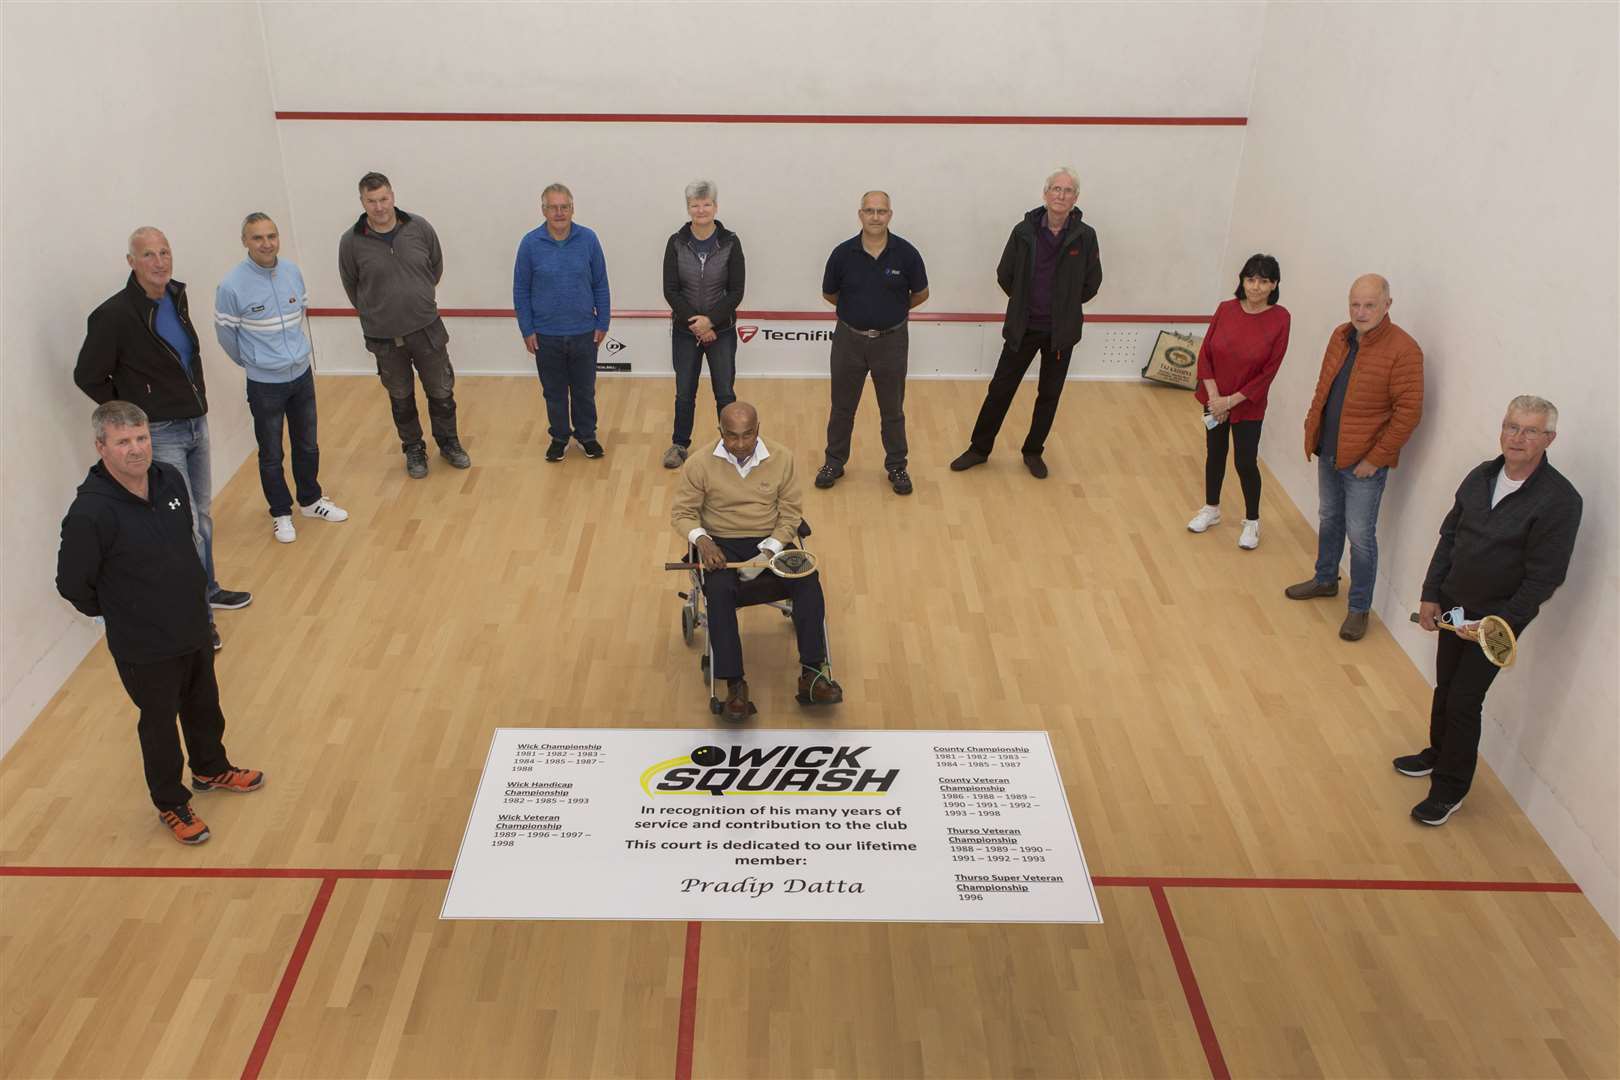 Court one at Wick Squash Club was named in Pradip Datta's honour in 2021. Picture: Robert MacDonald / Northern Studios